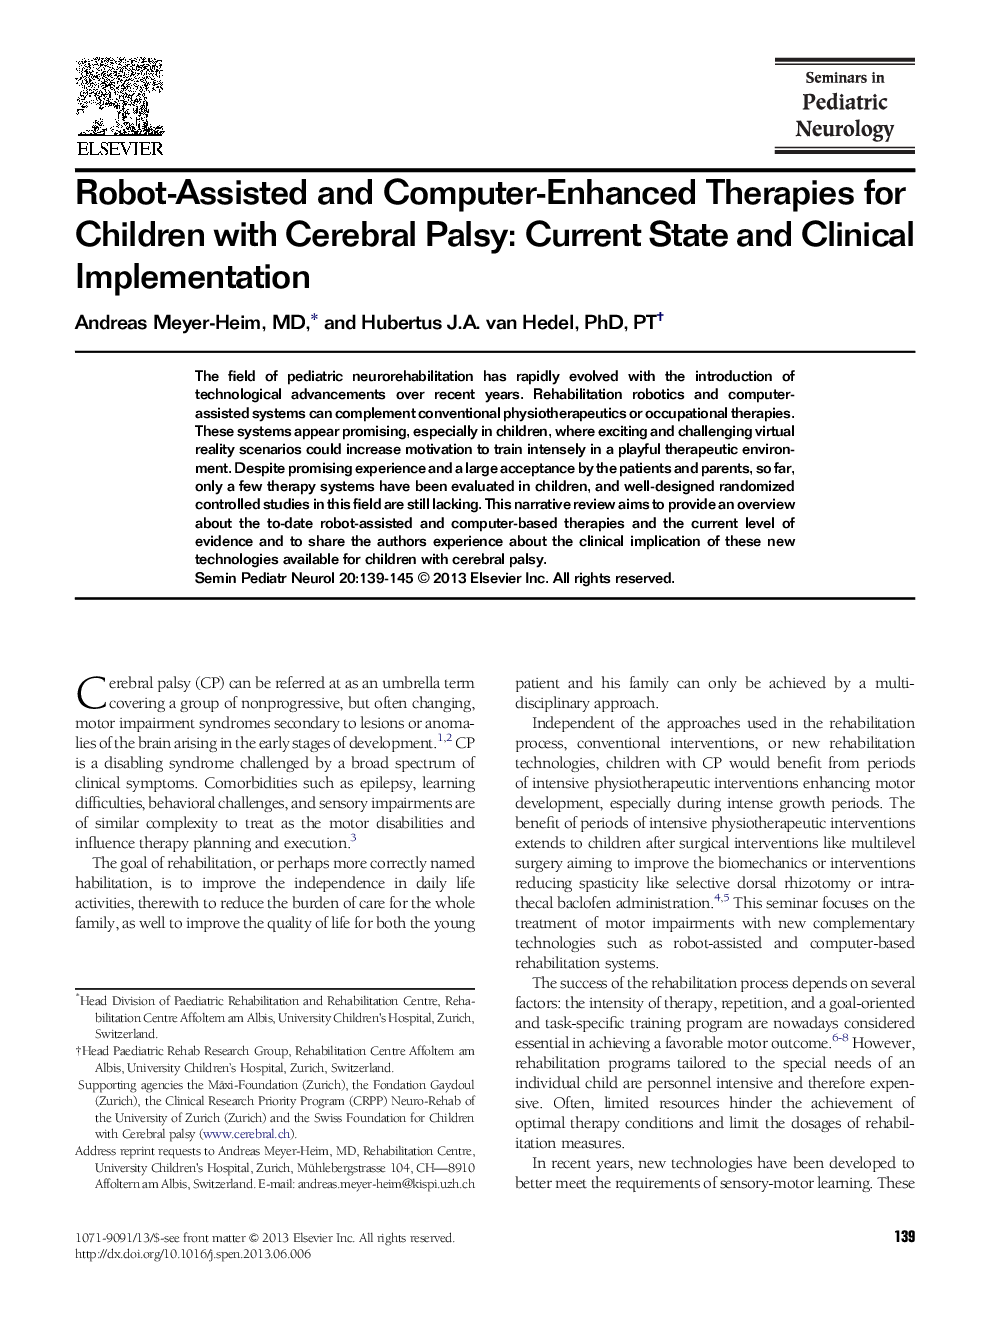 Robot-Assisted and Computer-Enhanced Therapies for Children with Cerebral Palsy: Current State and Clinical Implementation 